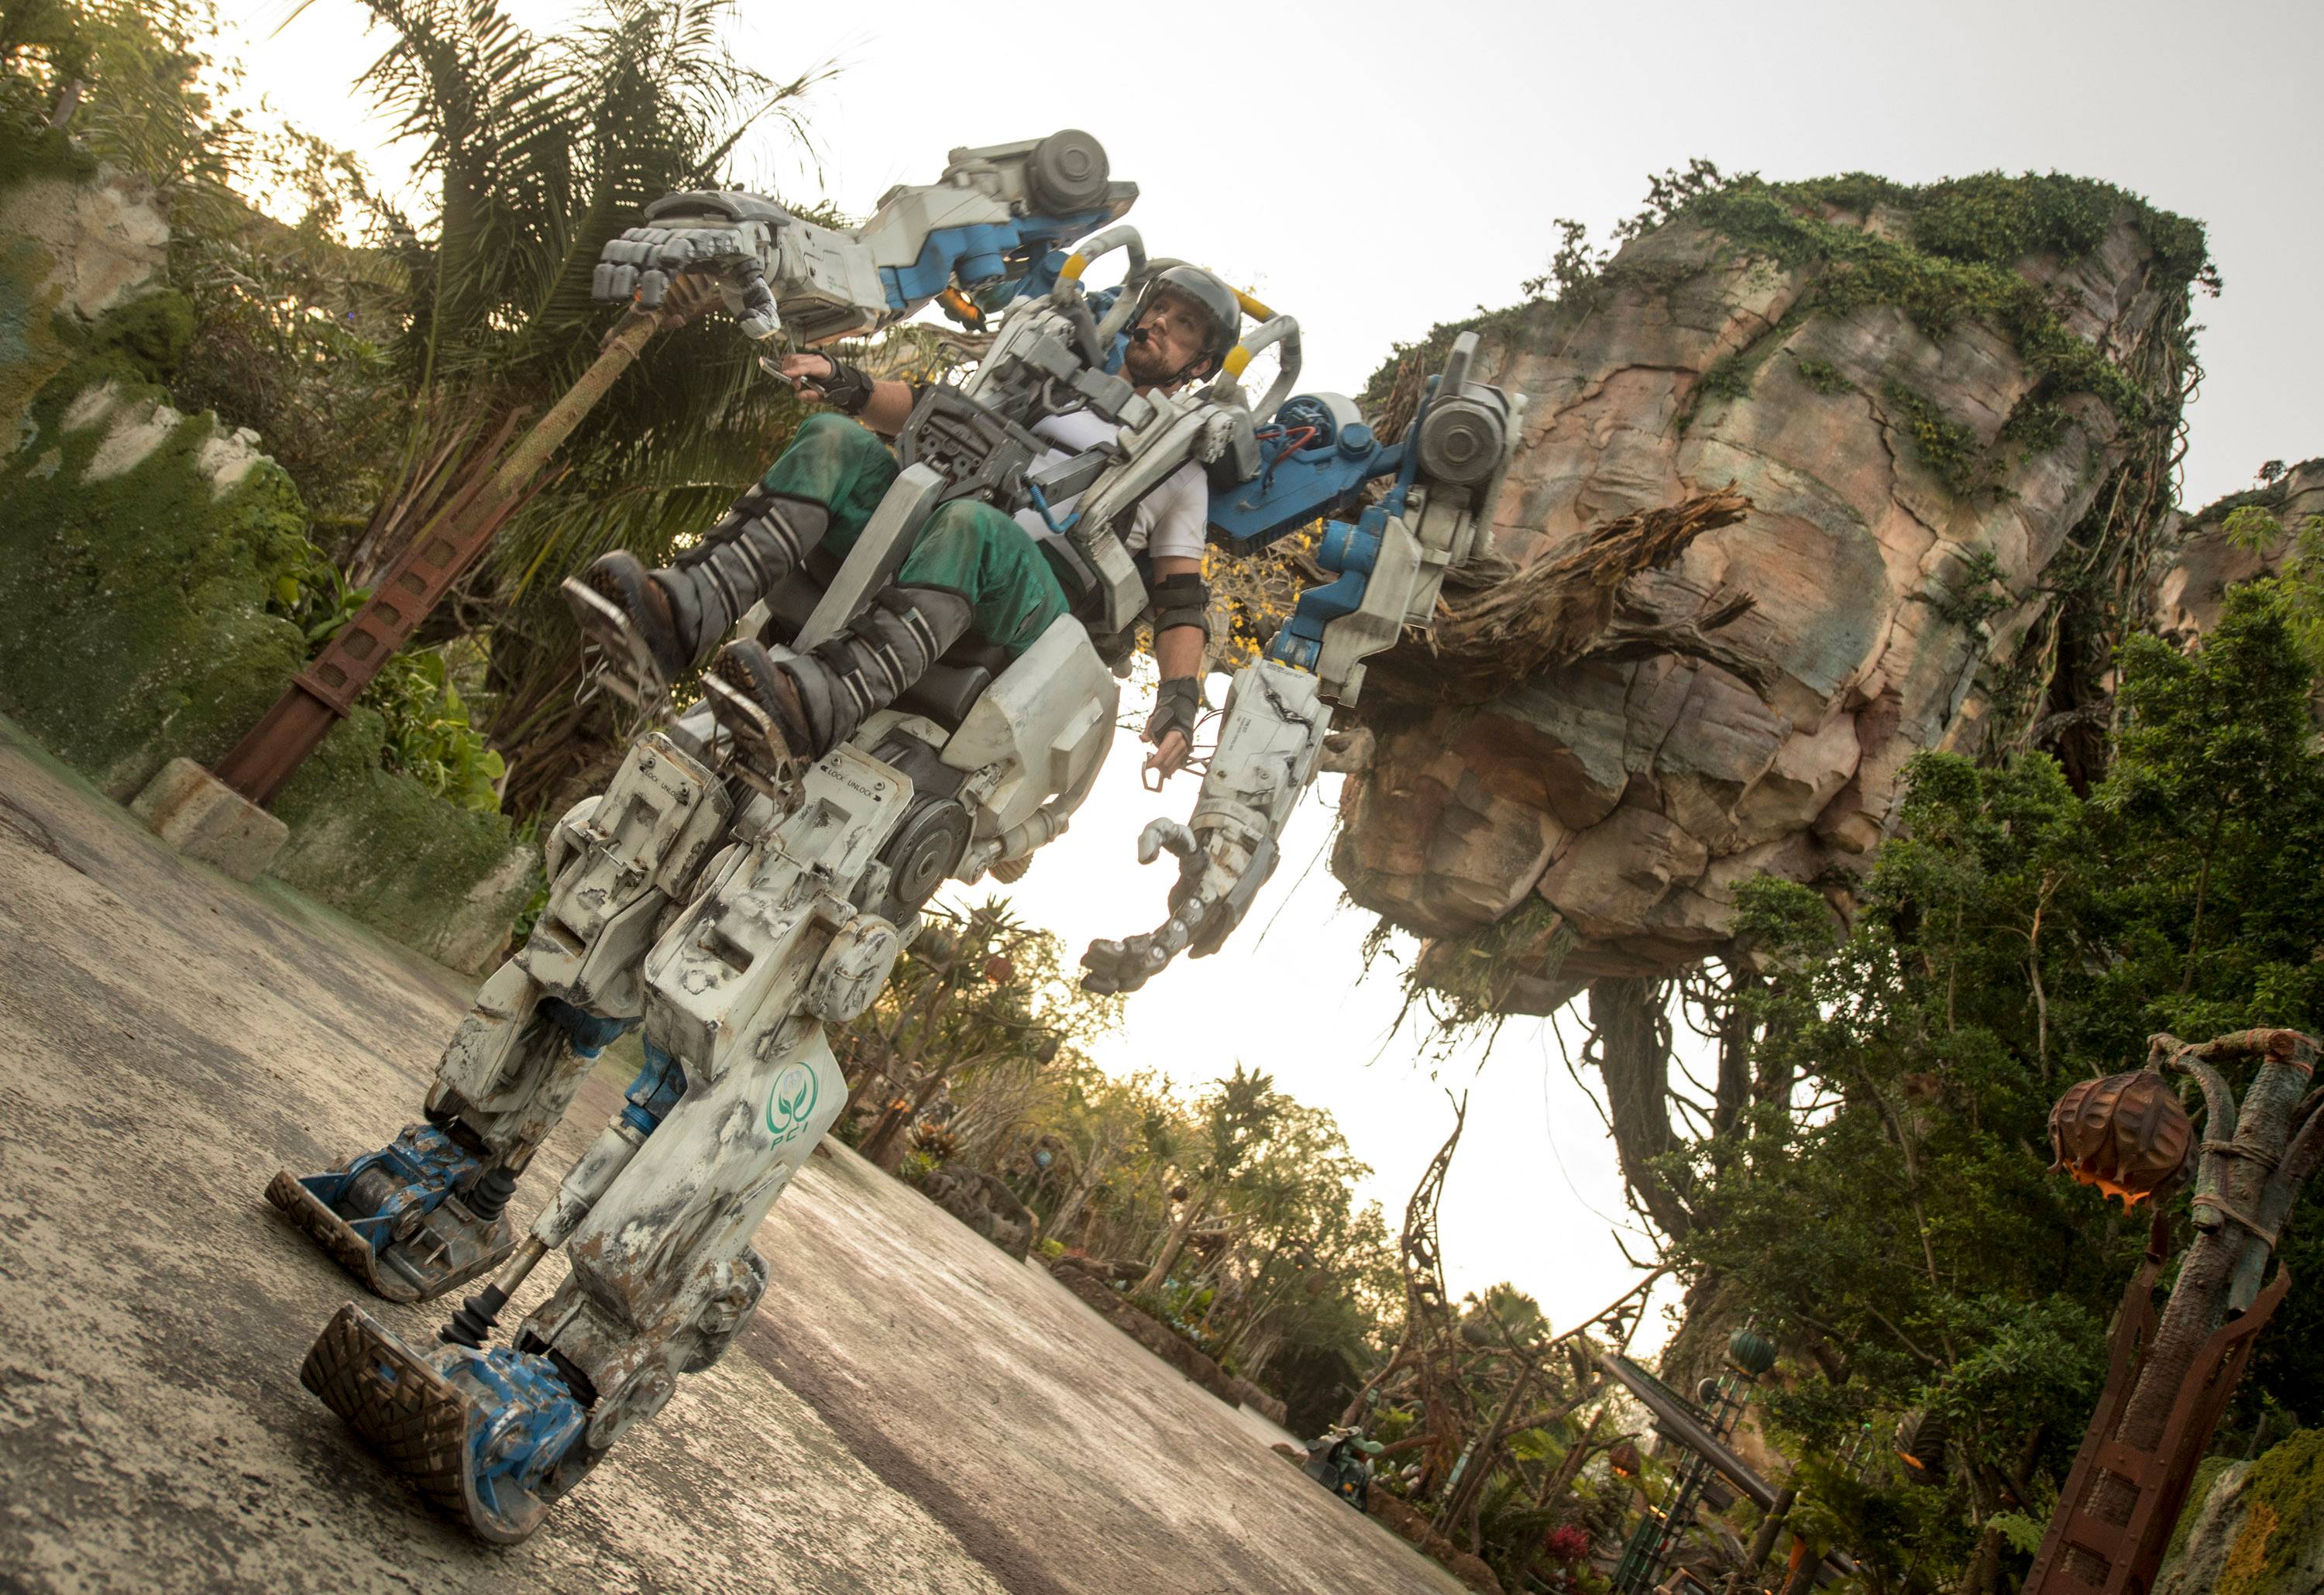 VIDEO - New entertainment coming to Pandora - The World of AVATAR